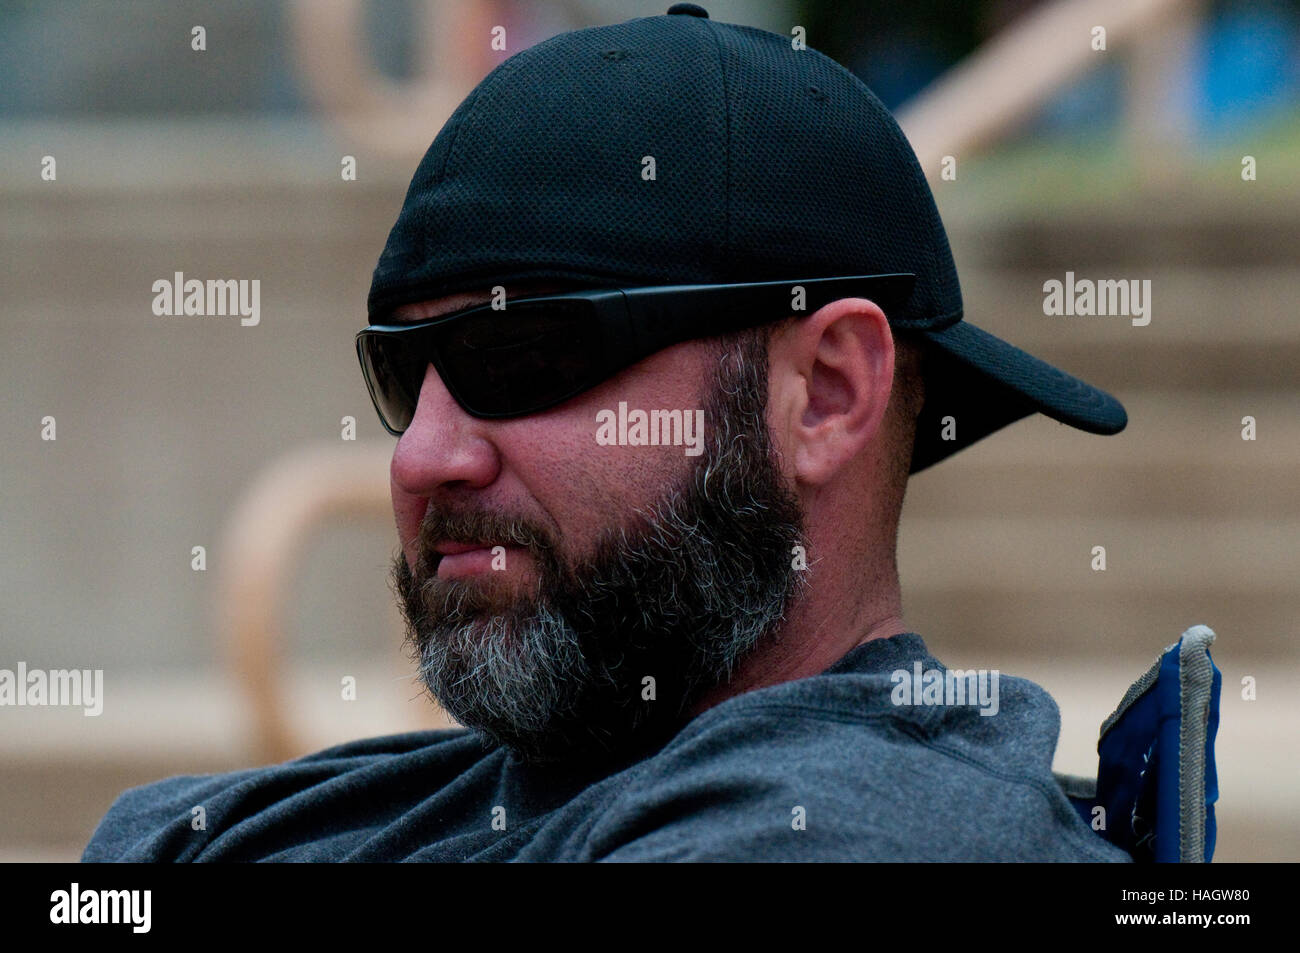 Middle-aged man with black and grey beard wearing sunglasses and hat backwards. Stock Photo